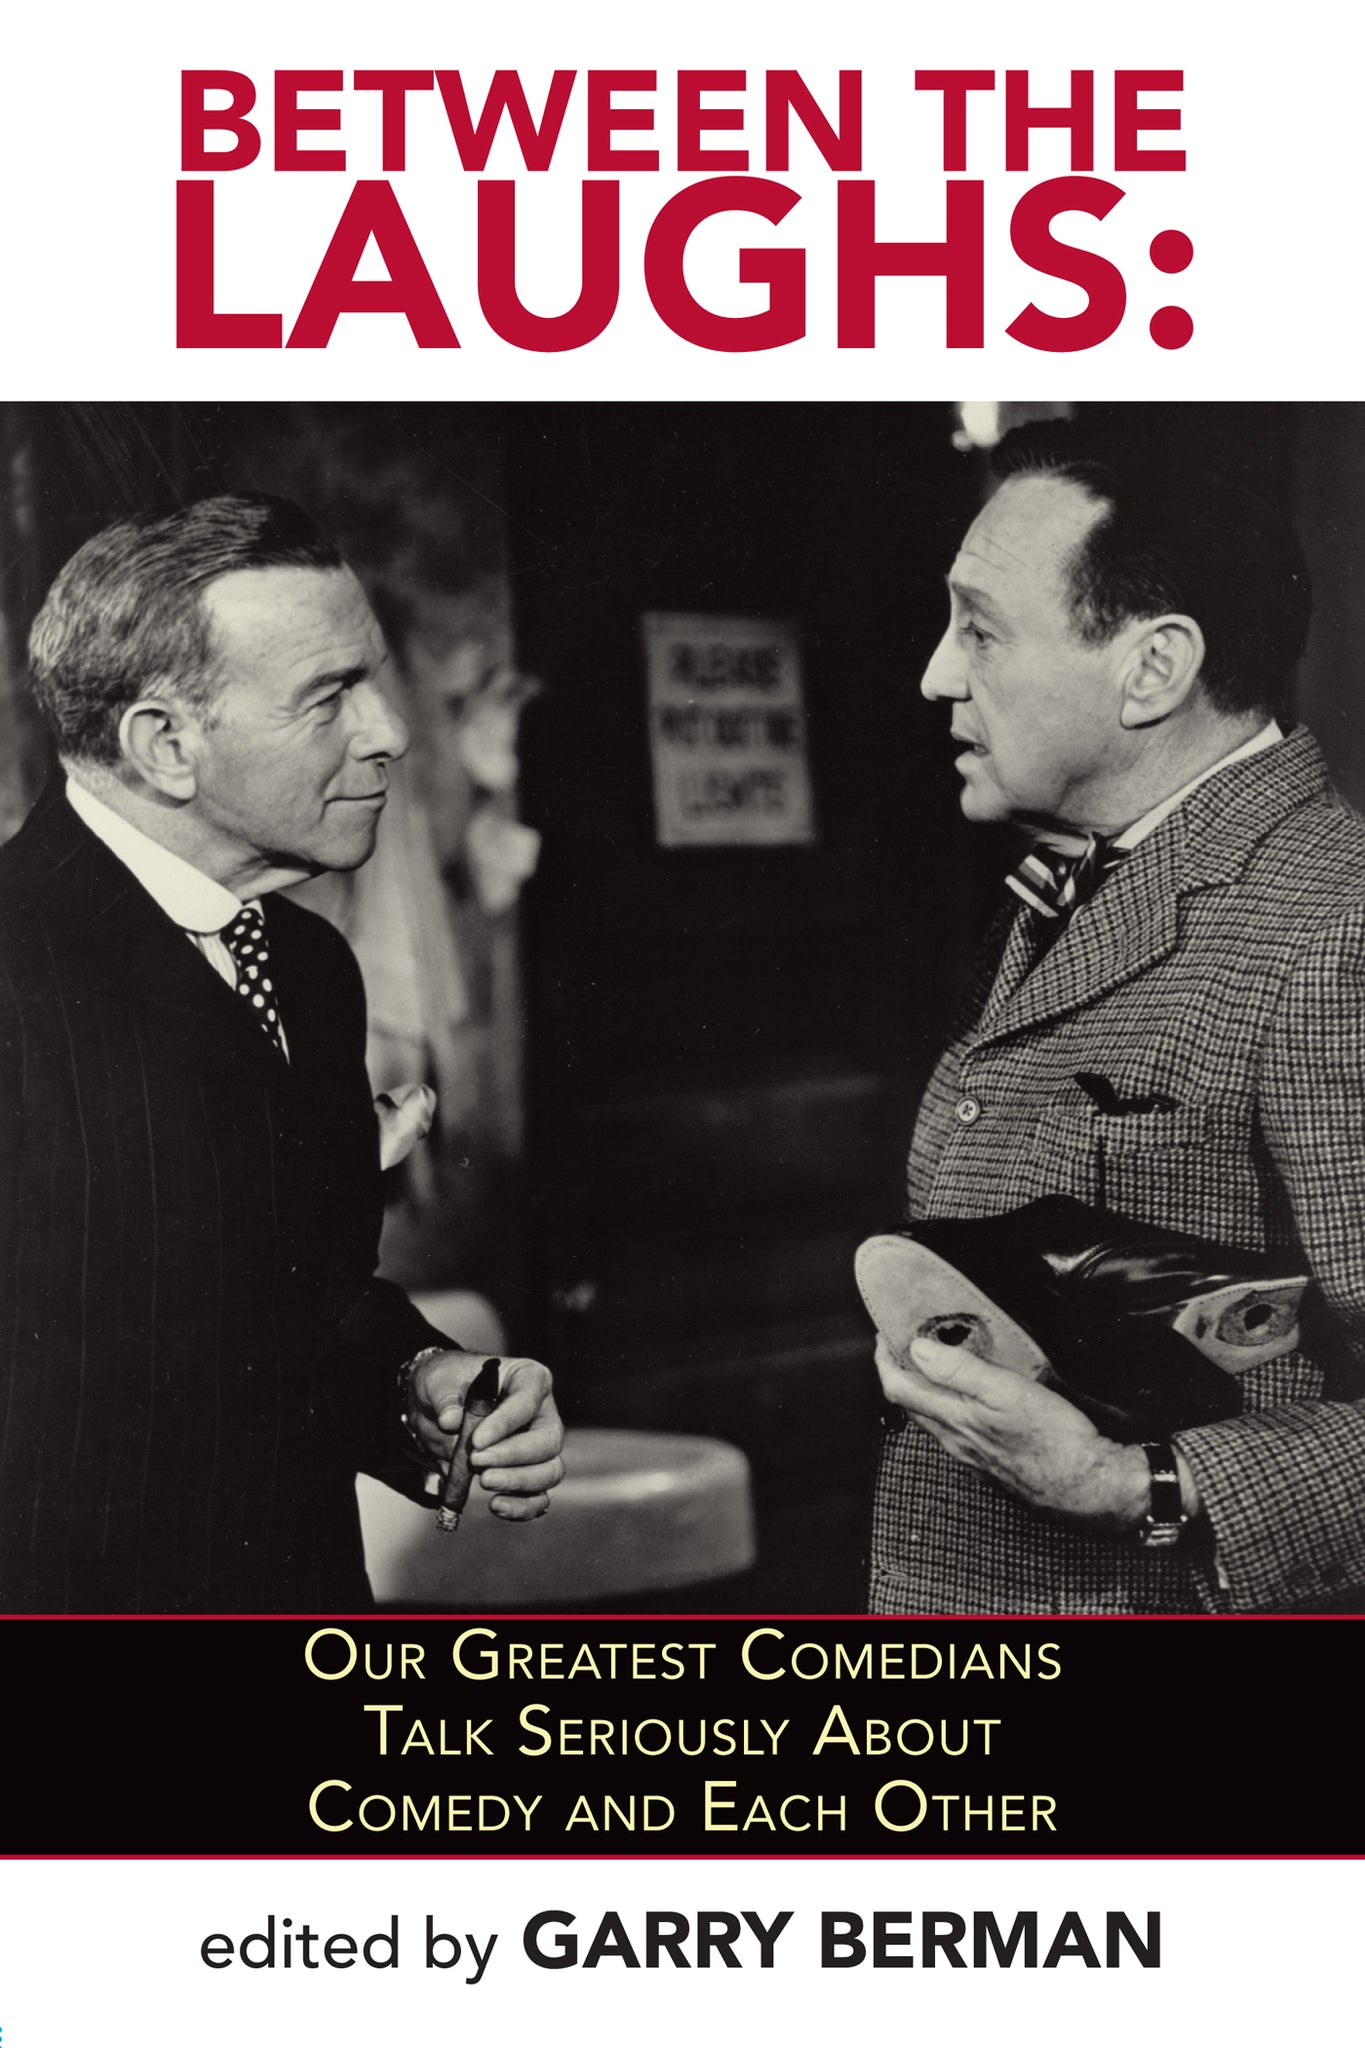 Between The Laughs: Our Greatest Comedians Talk Seriously About Comedy and Each Other (paperback) - BearManor Manor